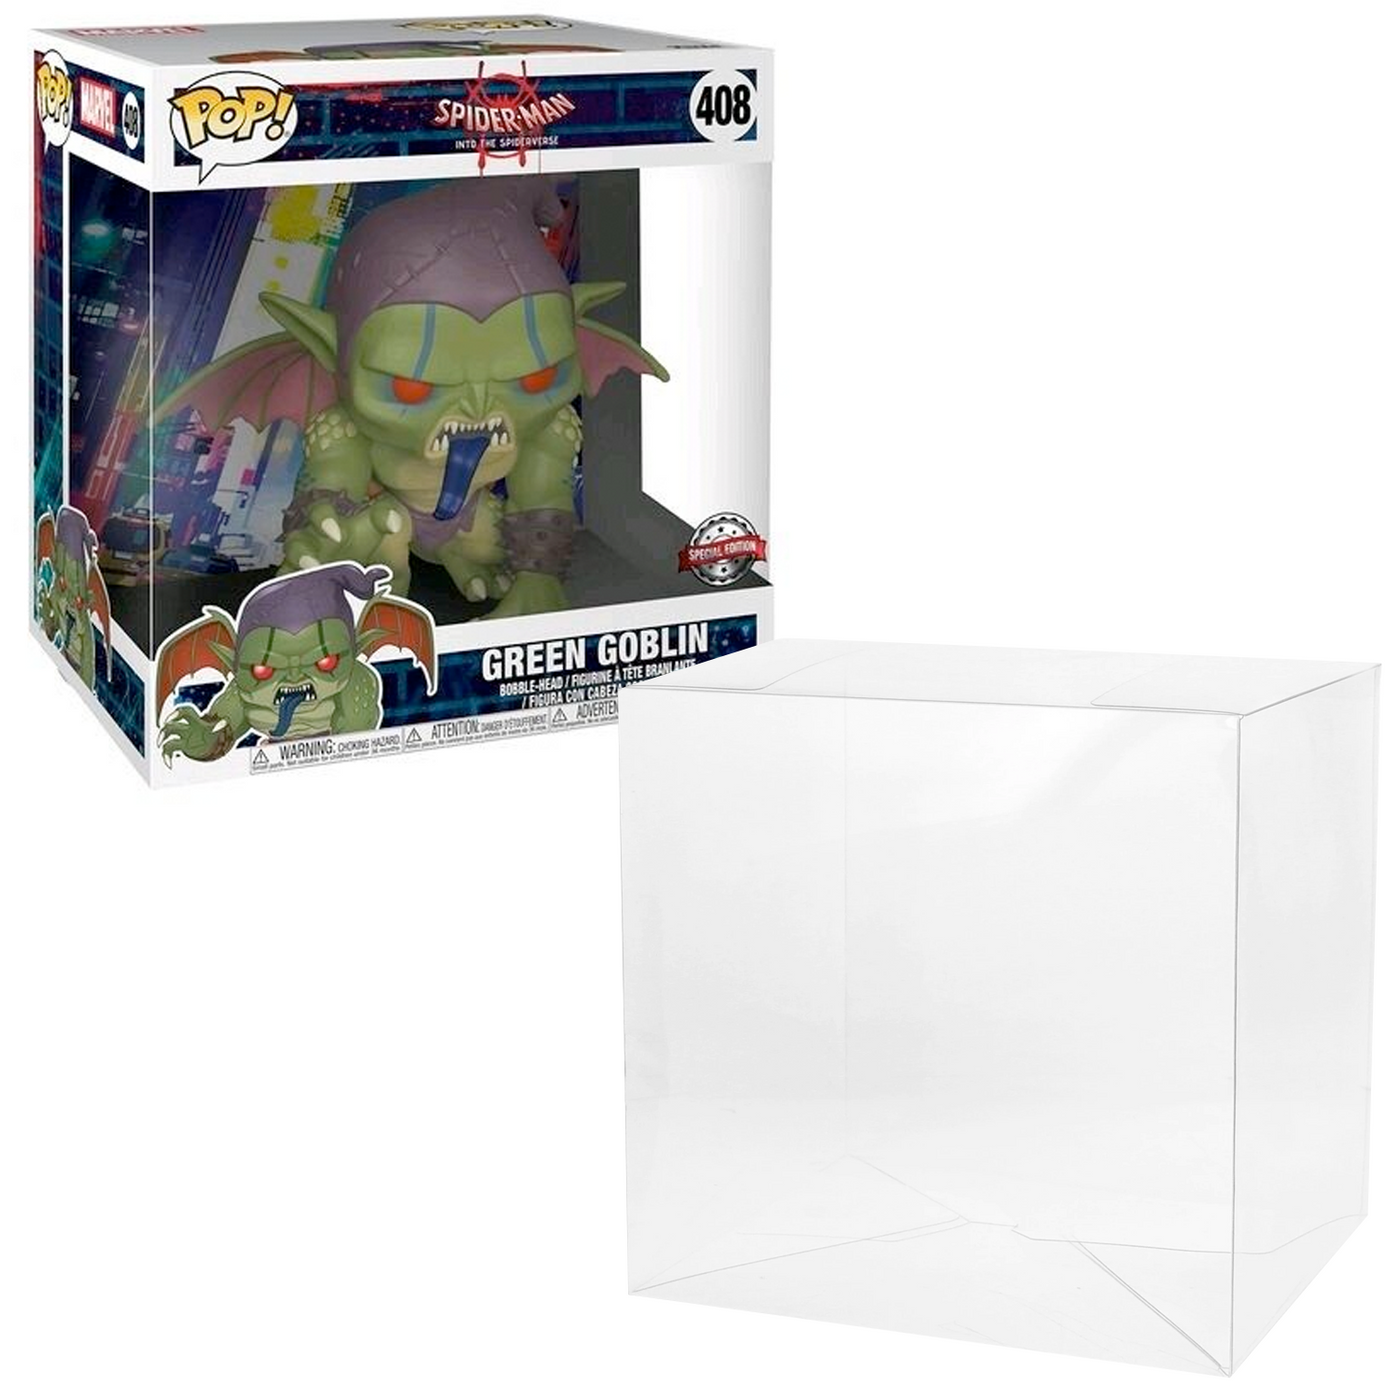 green goblin wide 10 inch best funko pop protectors thick strong uv scratch flat top stack vinyl display geek plastic shield vaulted eco armor fits collect protect display case kollector protector